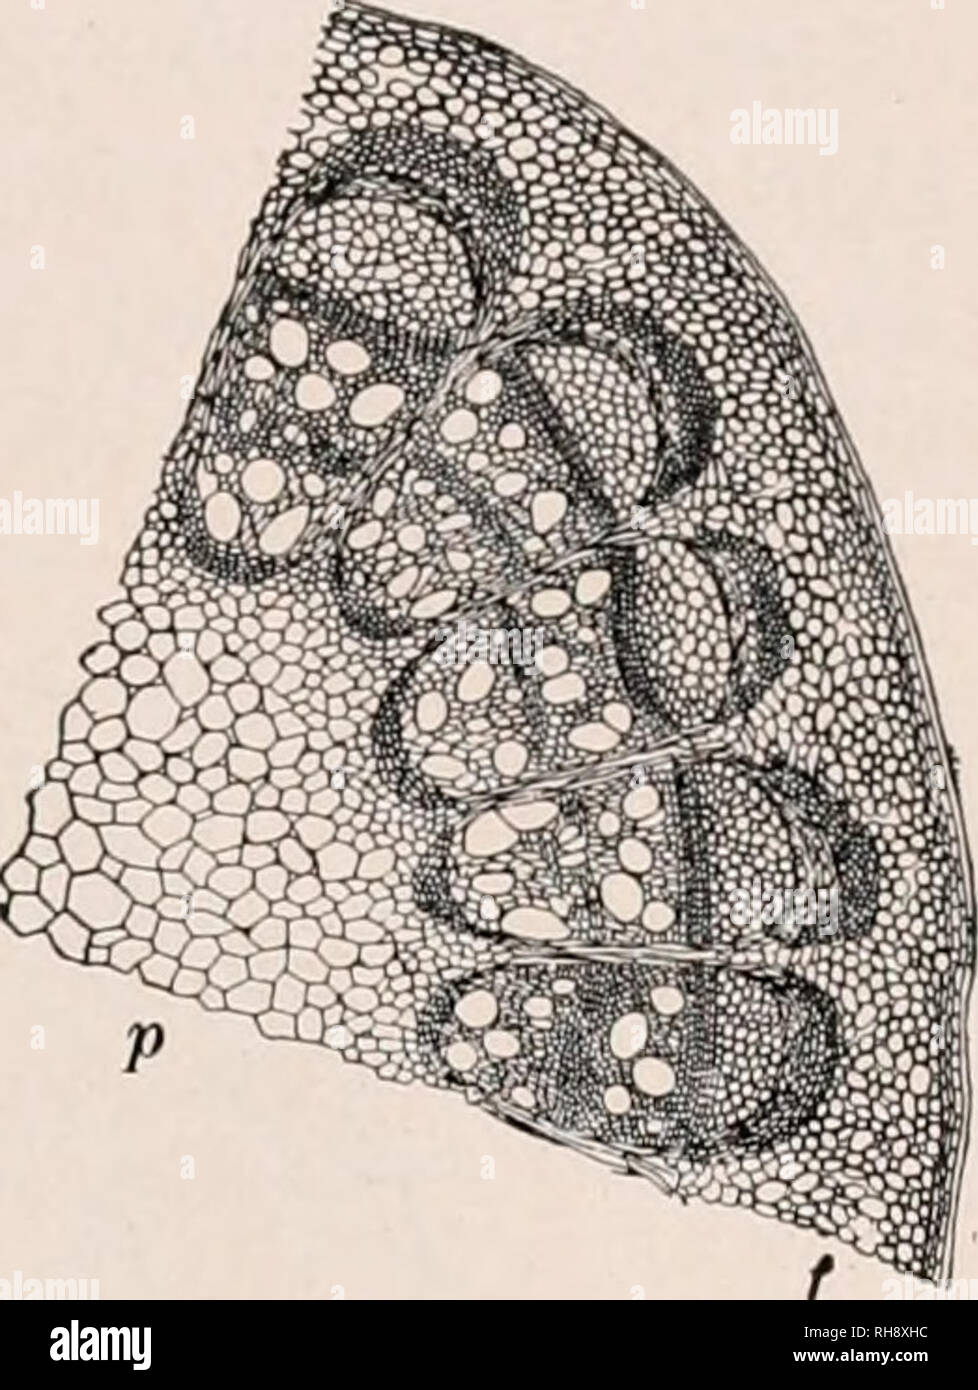 . Botany; an elementary text for schools. Plants. OTHER STEMS—THREE TYPES OF BUNDLES 261 one year old. Stain with hematoxylin. Make a permanent mount. Study with low power, and make a sketch show- ing the shape and location of the fibro-vascular bundles. Fig. 402. Save the mount for further study. If meni- spermum stems are not easily ob- tained, ivy (Hedera helix) or clem- atis may be substituted. 423. OTHER STEMS.—Besides the two types of stems studied above, which are prevalent among pheno- gams, there are other structures of stems found among the cryptogams. A common arrangement of the bun Stock Photo